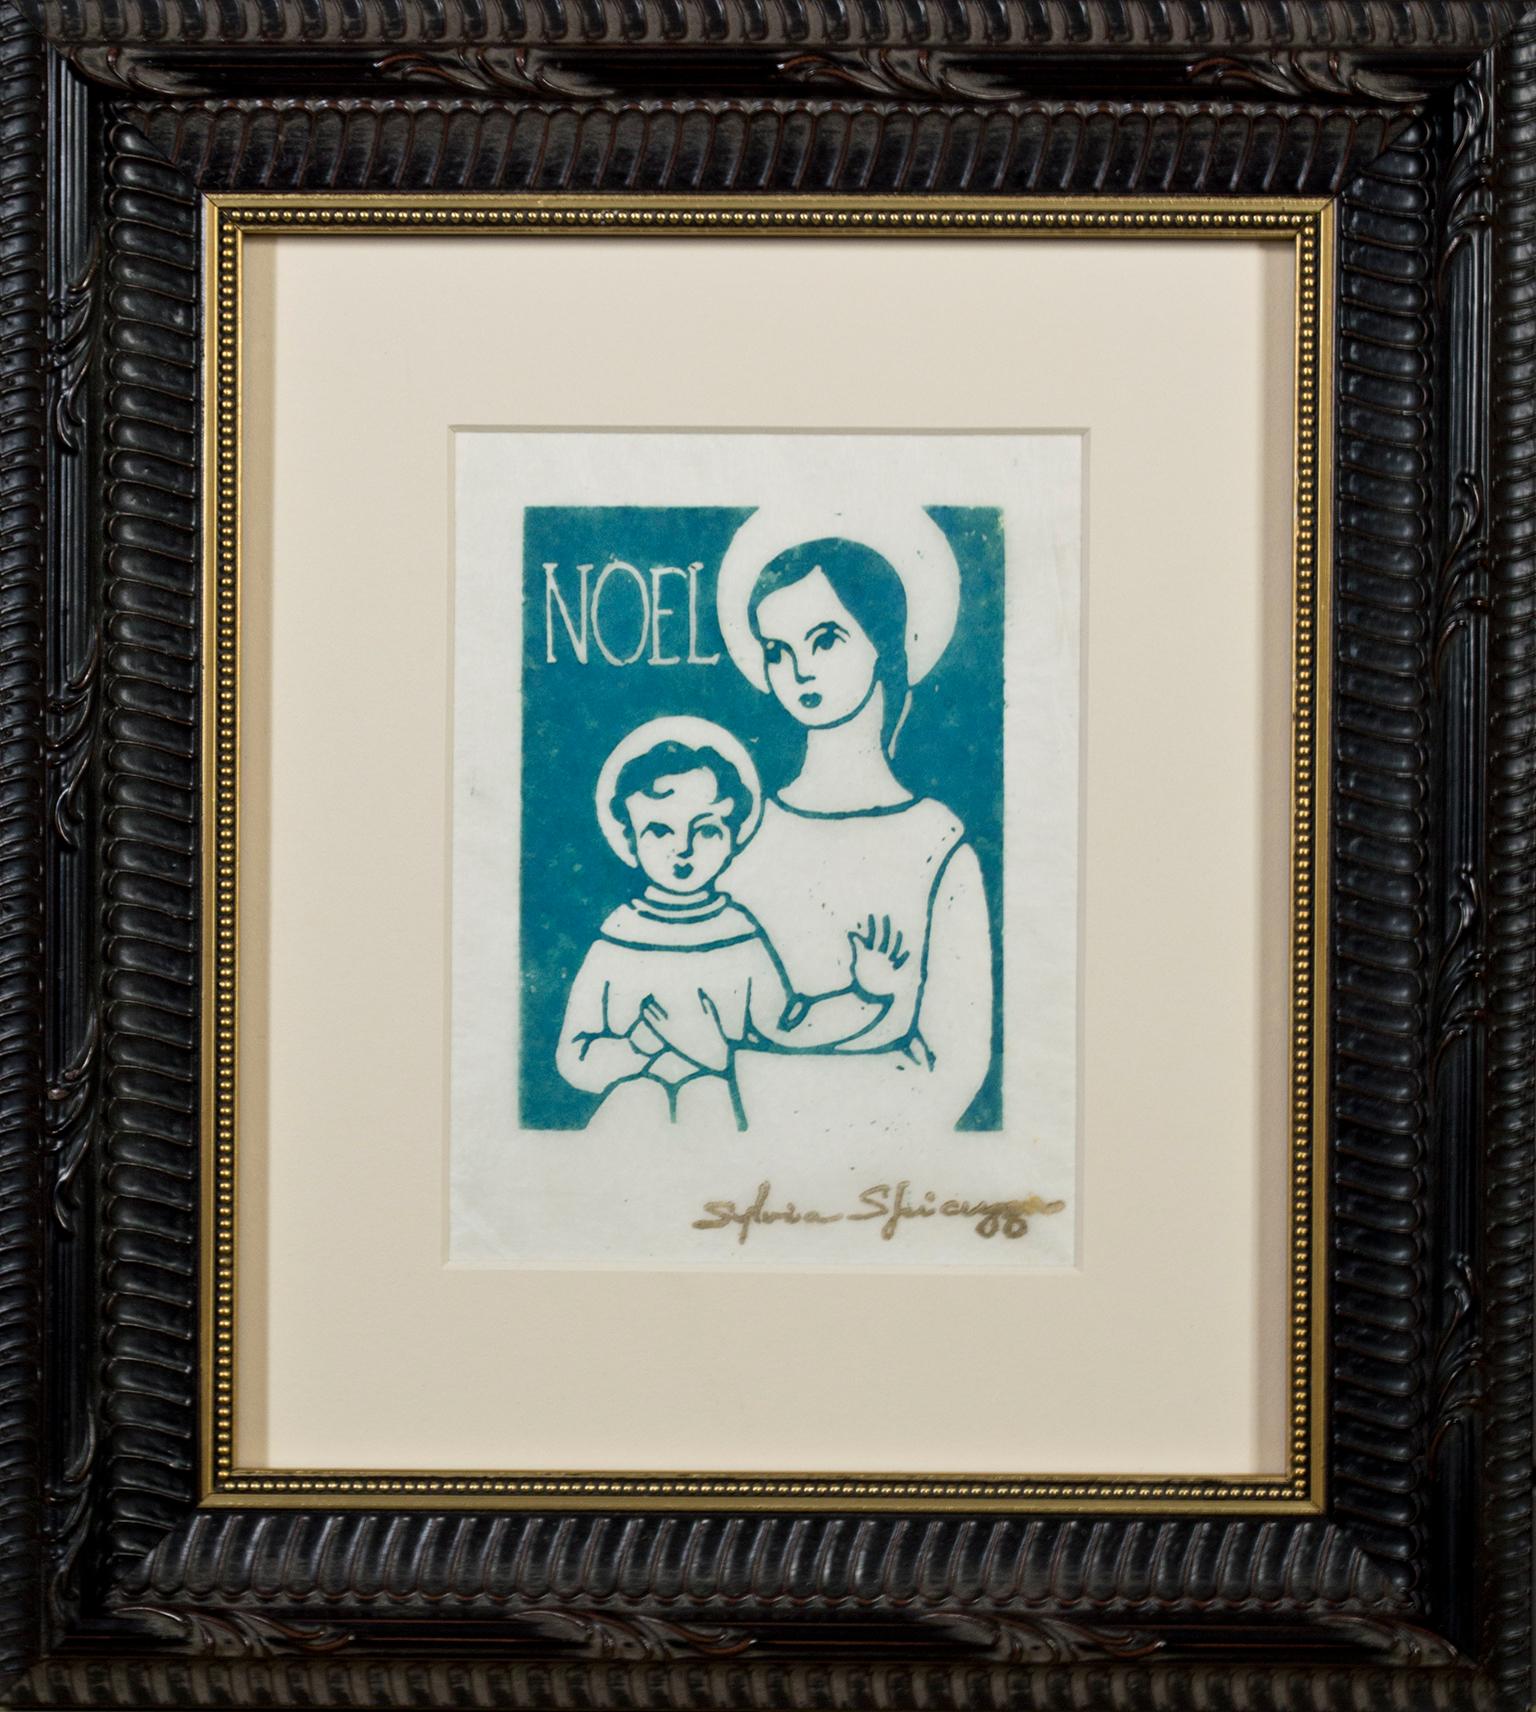 "Noel, " Religious Linocut in Blue on Tissue Paper signed by Sylvia Spicuzza